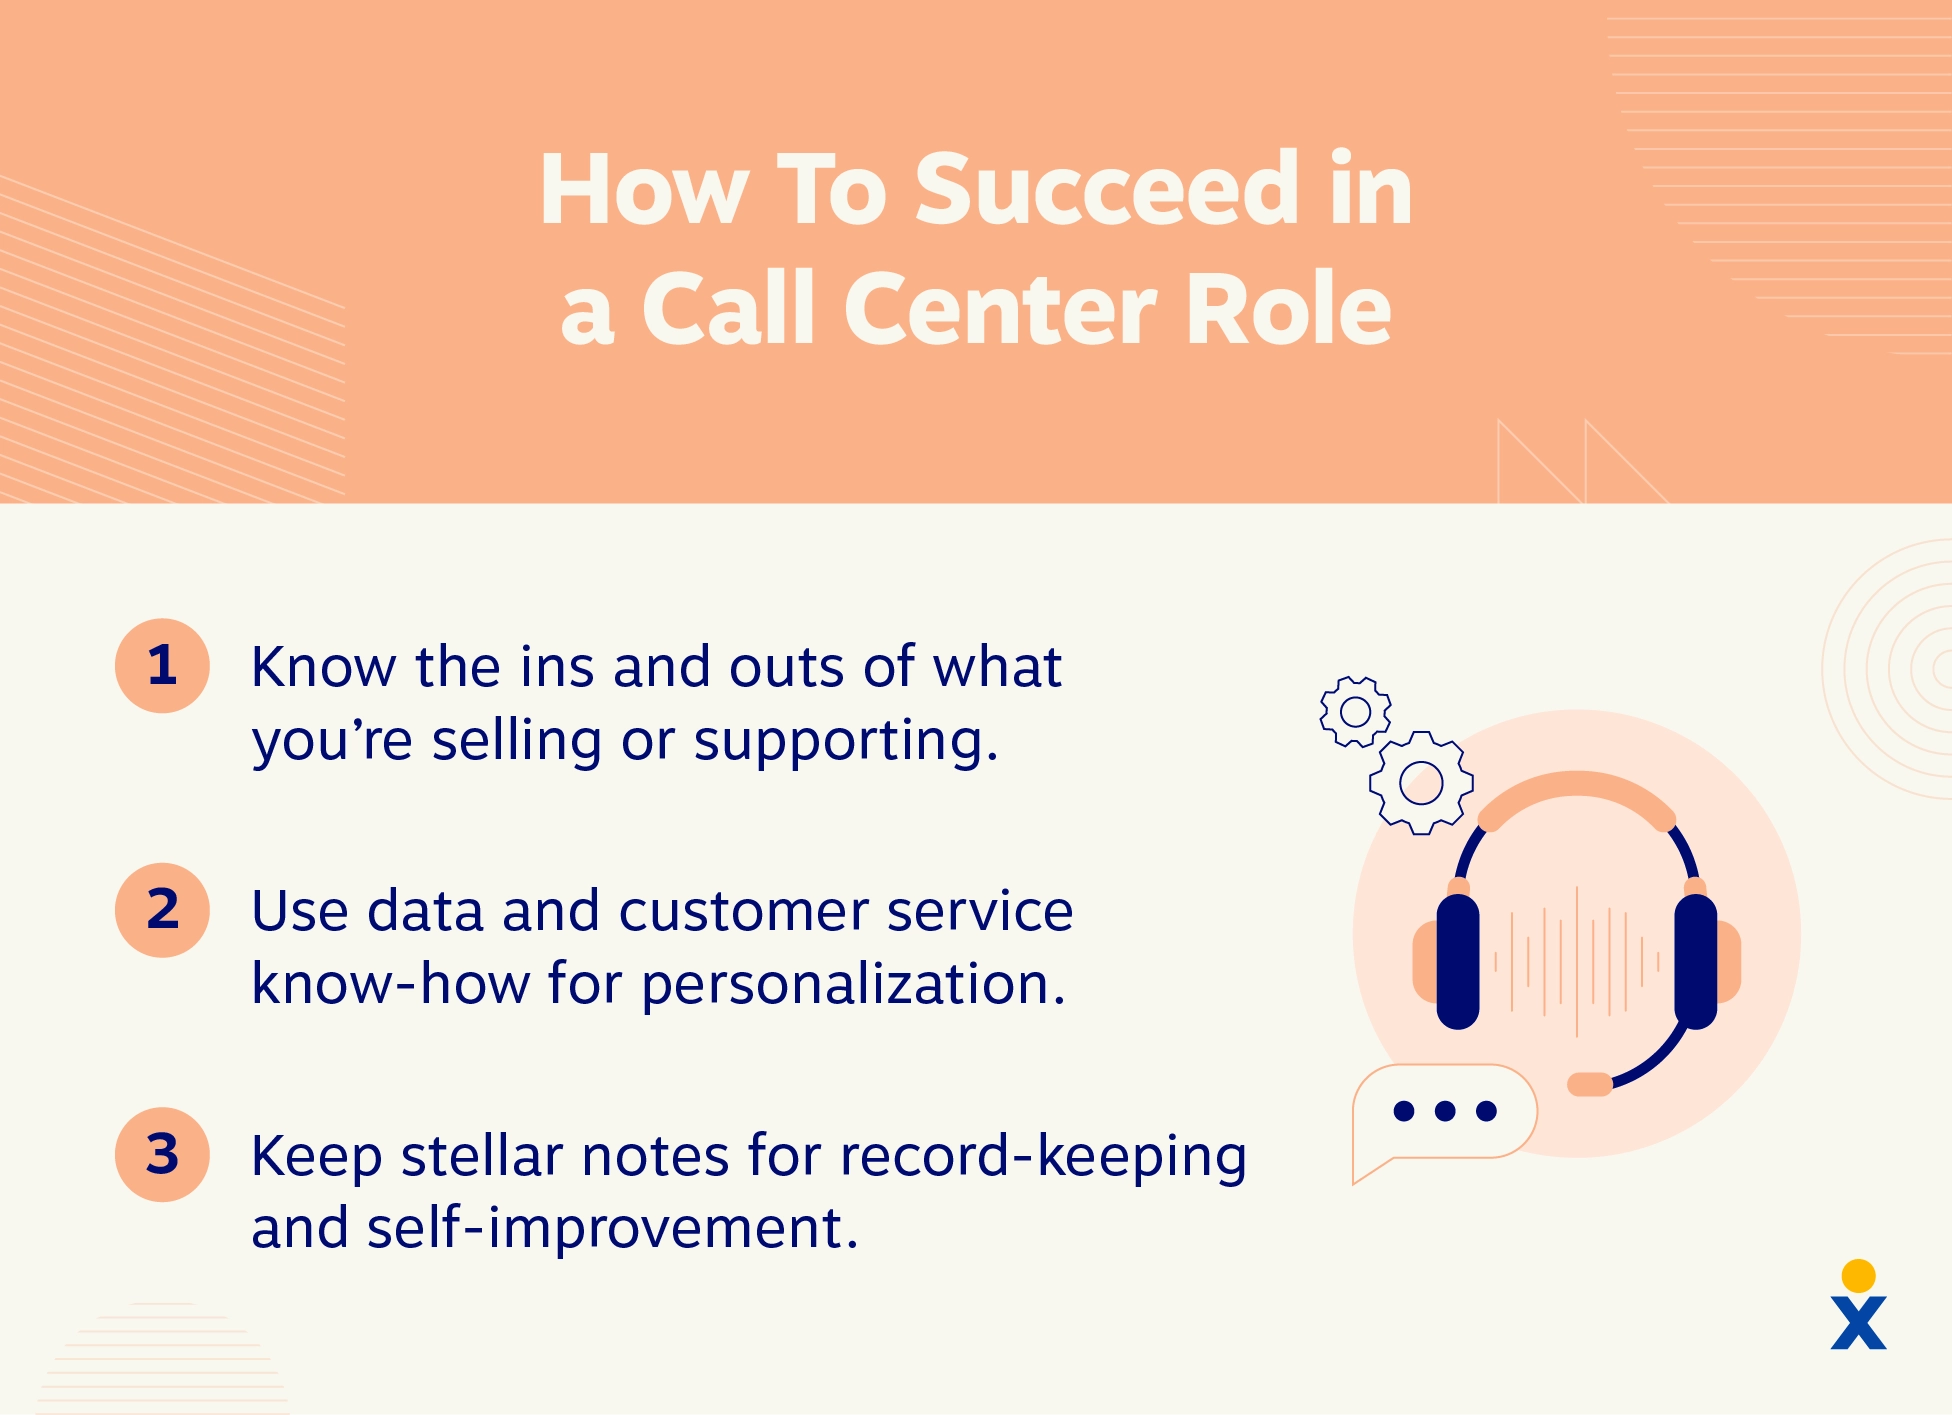 Three tips how to succeed in a call center role.